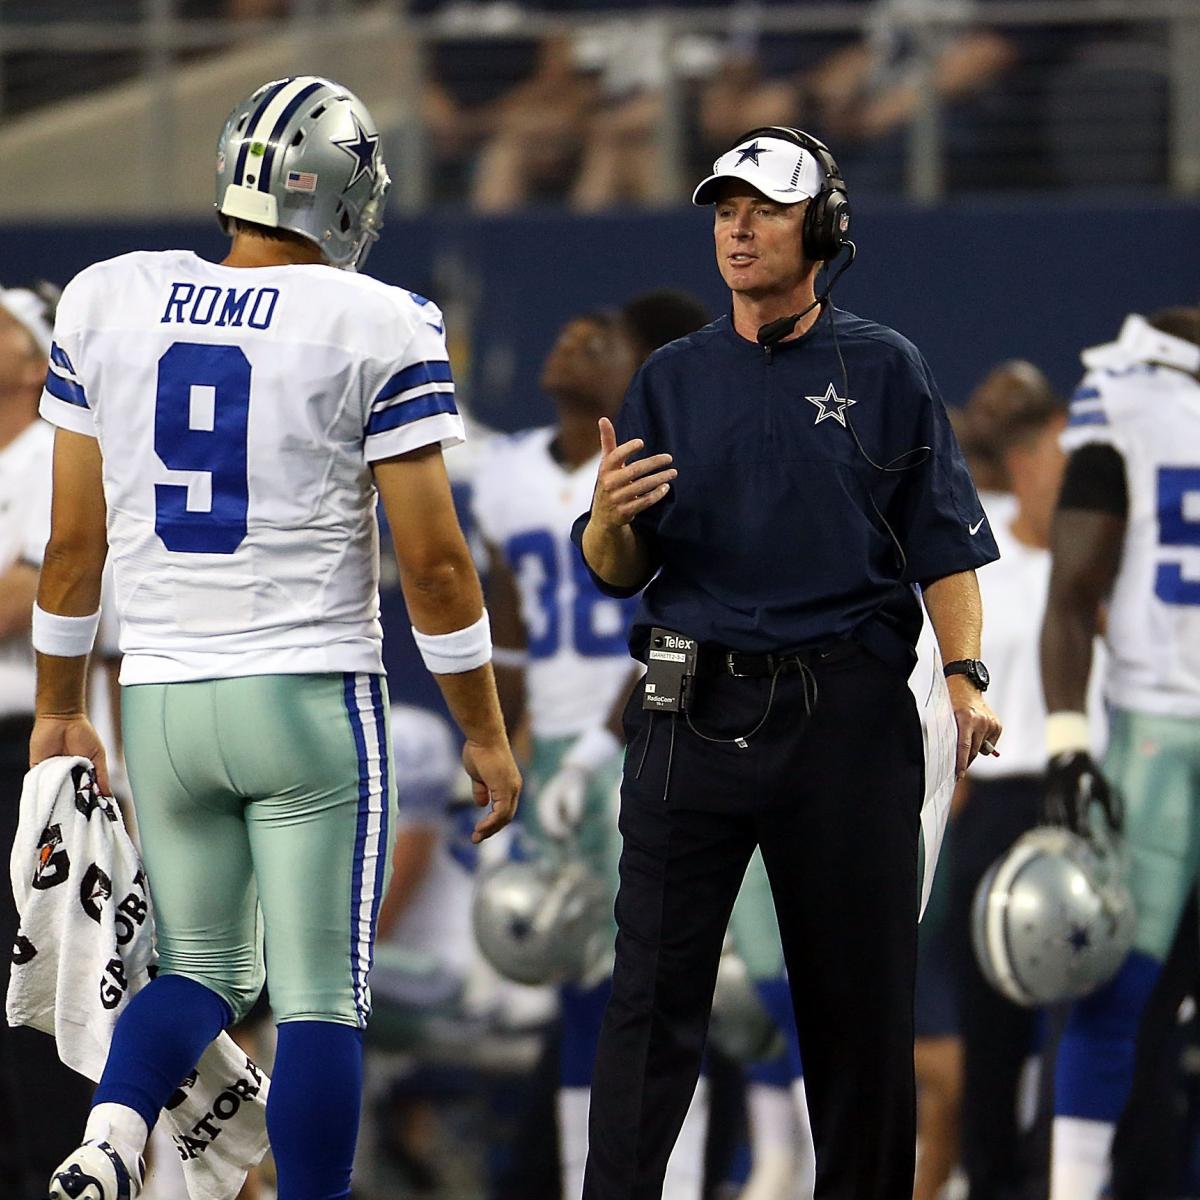 Things to watch in the Cowboys final preseason game